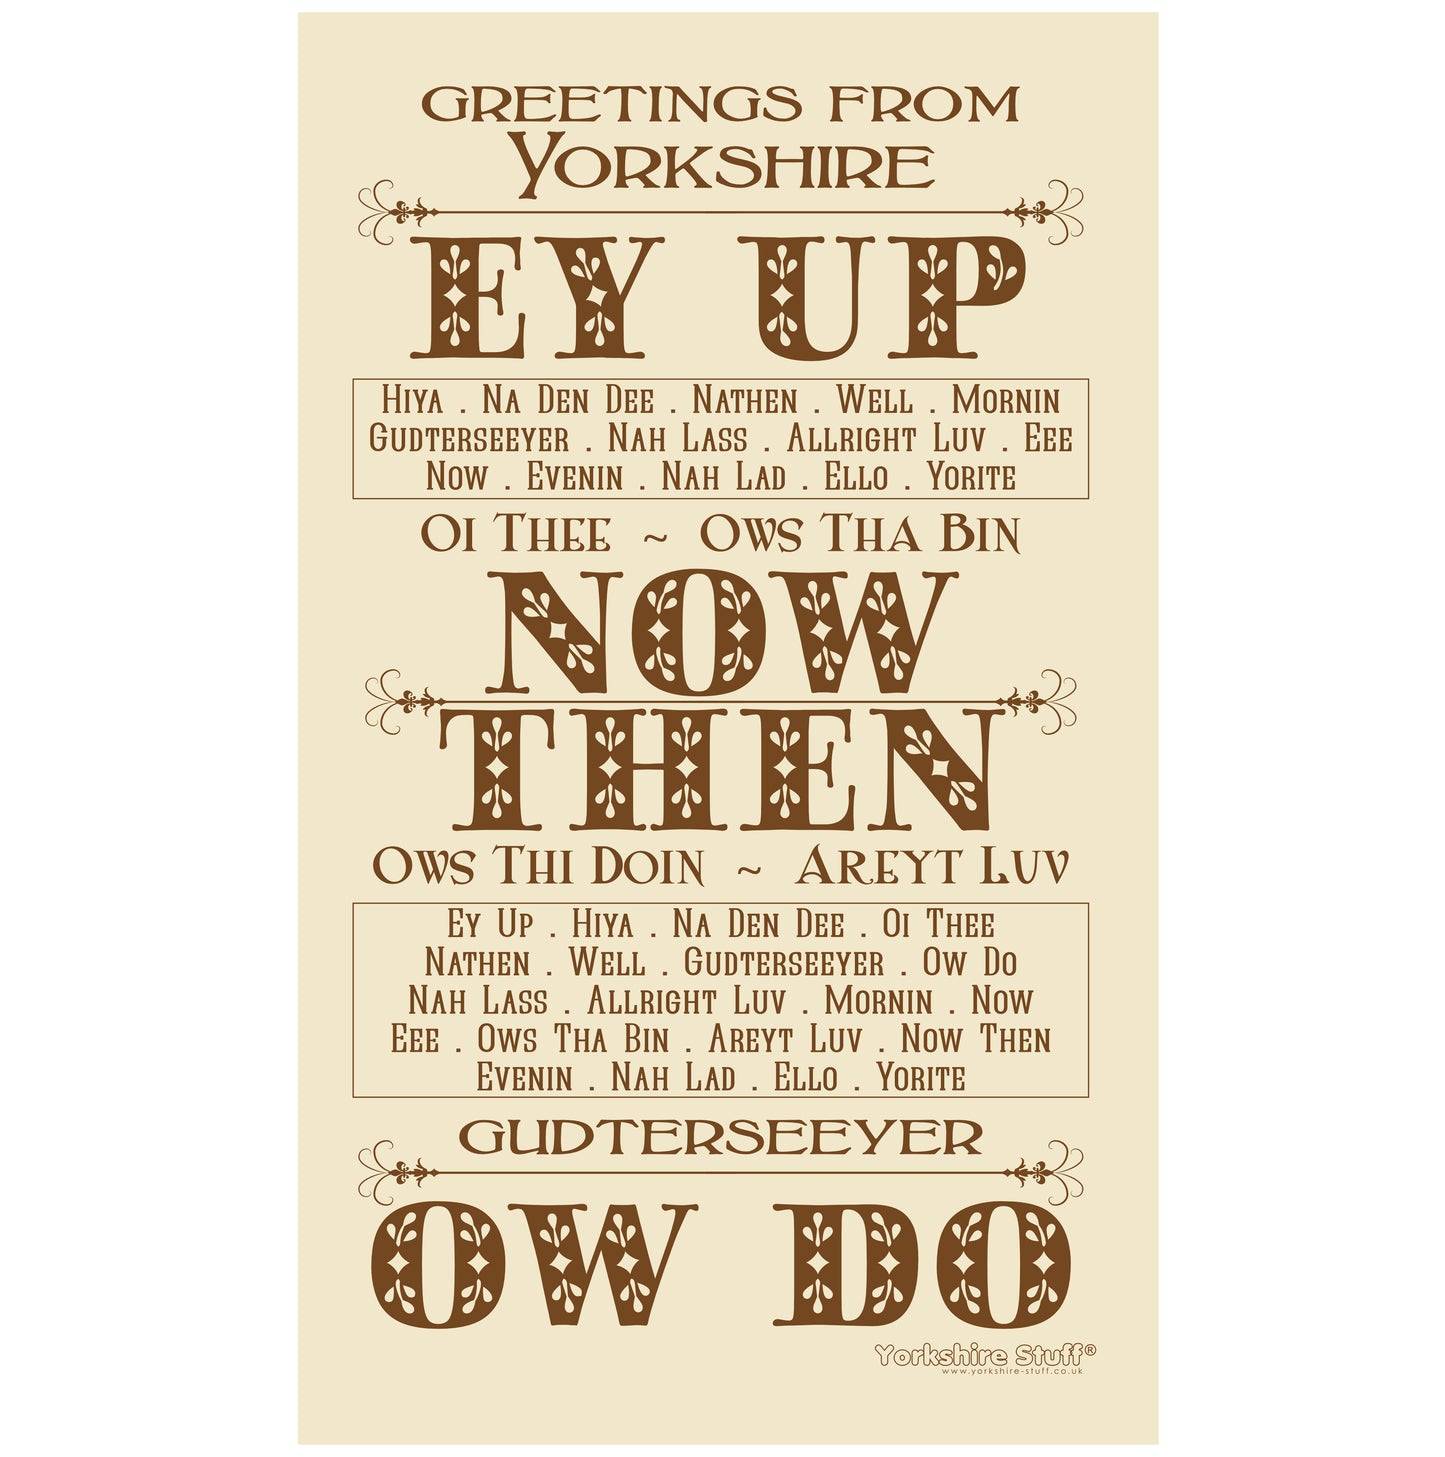 Tea towel with brown text on unbleached cotton, reads: Greetings from Yorkshire, Ey Up, Hiya, Ha Den Dee, Nathen, Well, Mornin, Gudterseeyer, Nah Lass, Allright Luv, Eee, Now, Evenin, Nah Lad, Ello, Yorite, Oi Thee, Ows Tha Bin, Now Then, Ows Thi Doin, Areyt Luv, Ow Do. Yorkshire Stuff Logo in corner.